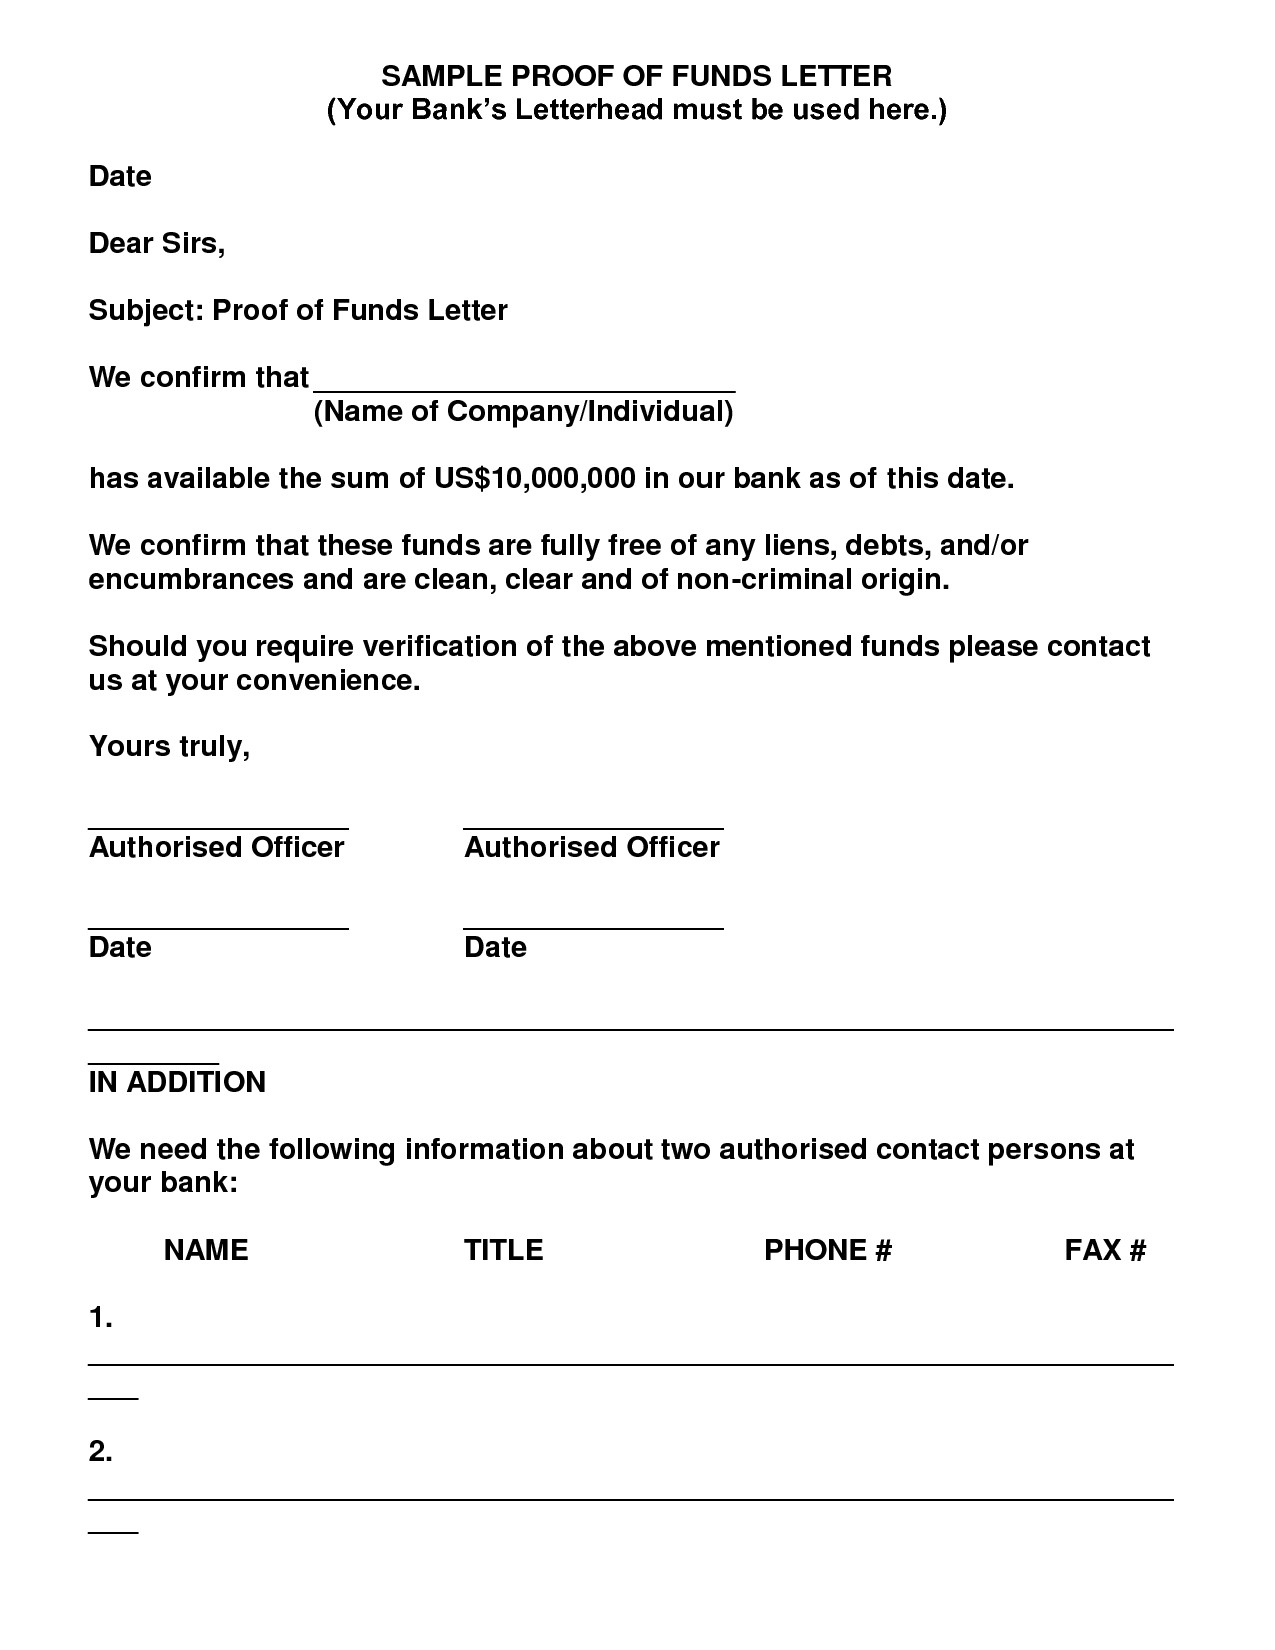 25 Best Proof of Funds Letter Templates   Template Lab